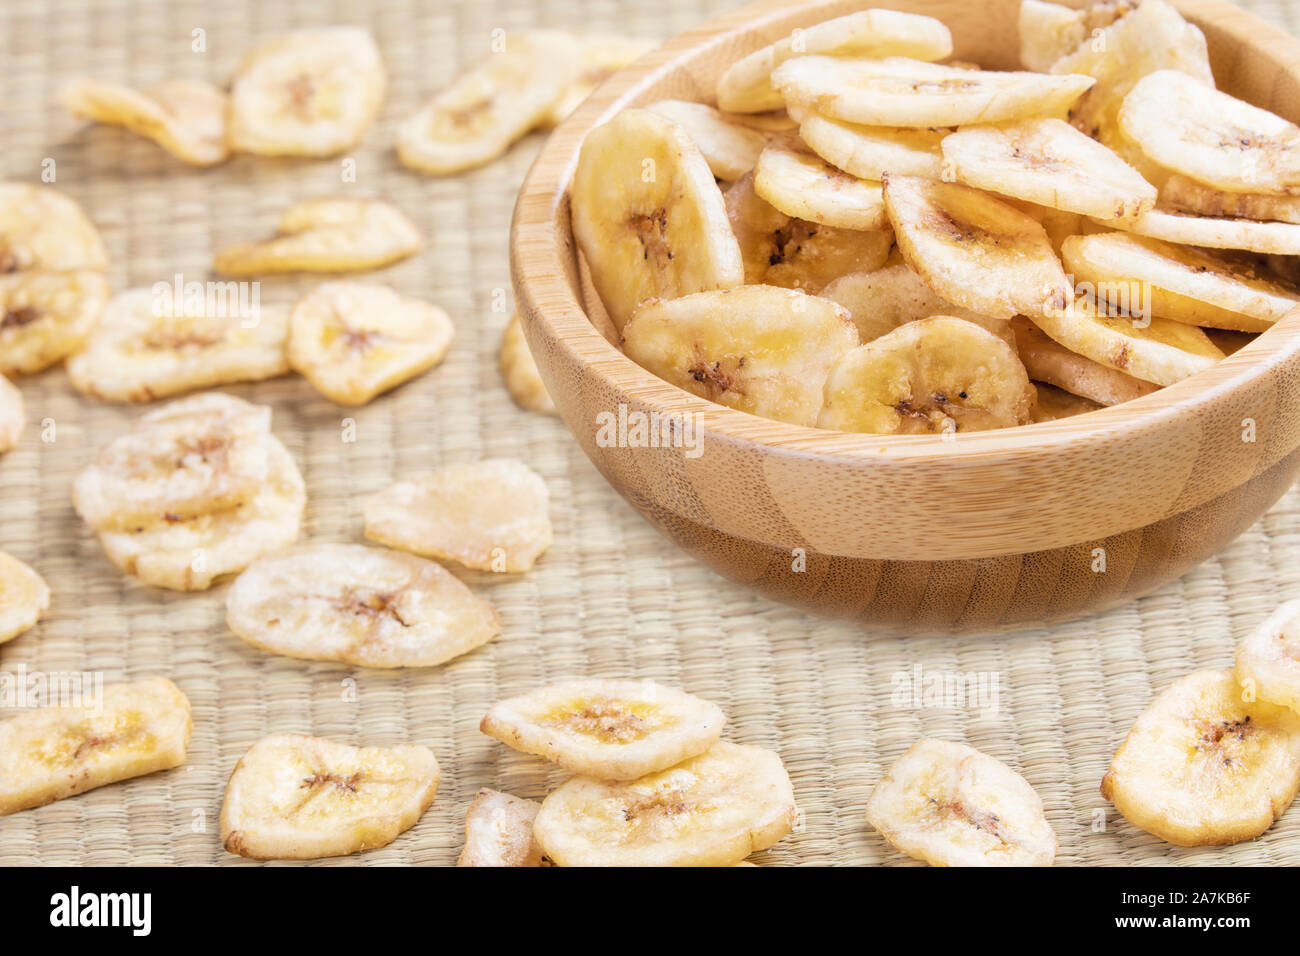 Bananas, are a great comfort food and snack food Stock Photo